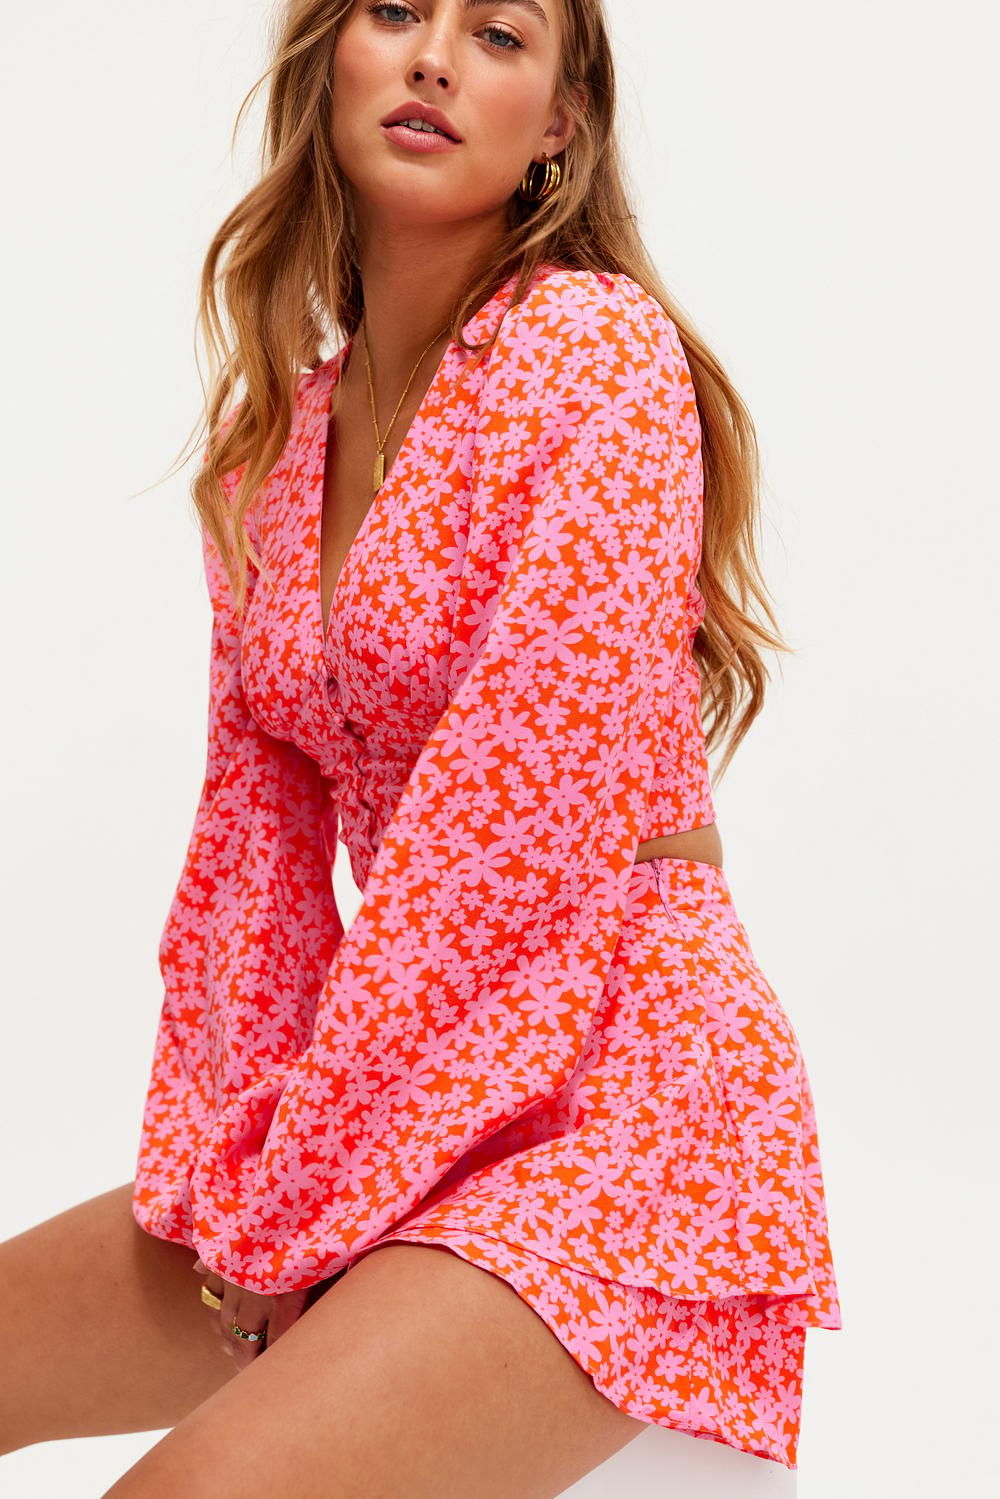 Pink blouse with floral print